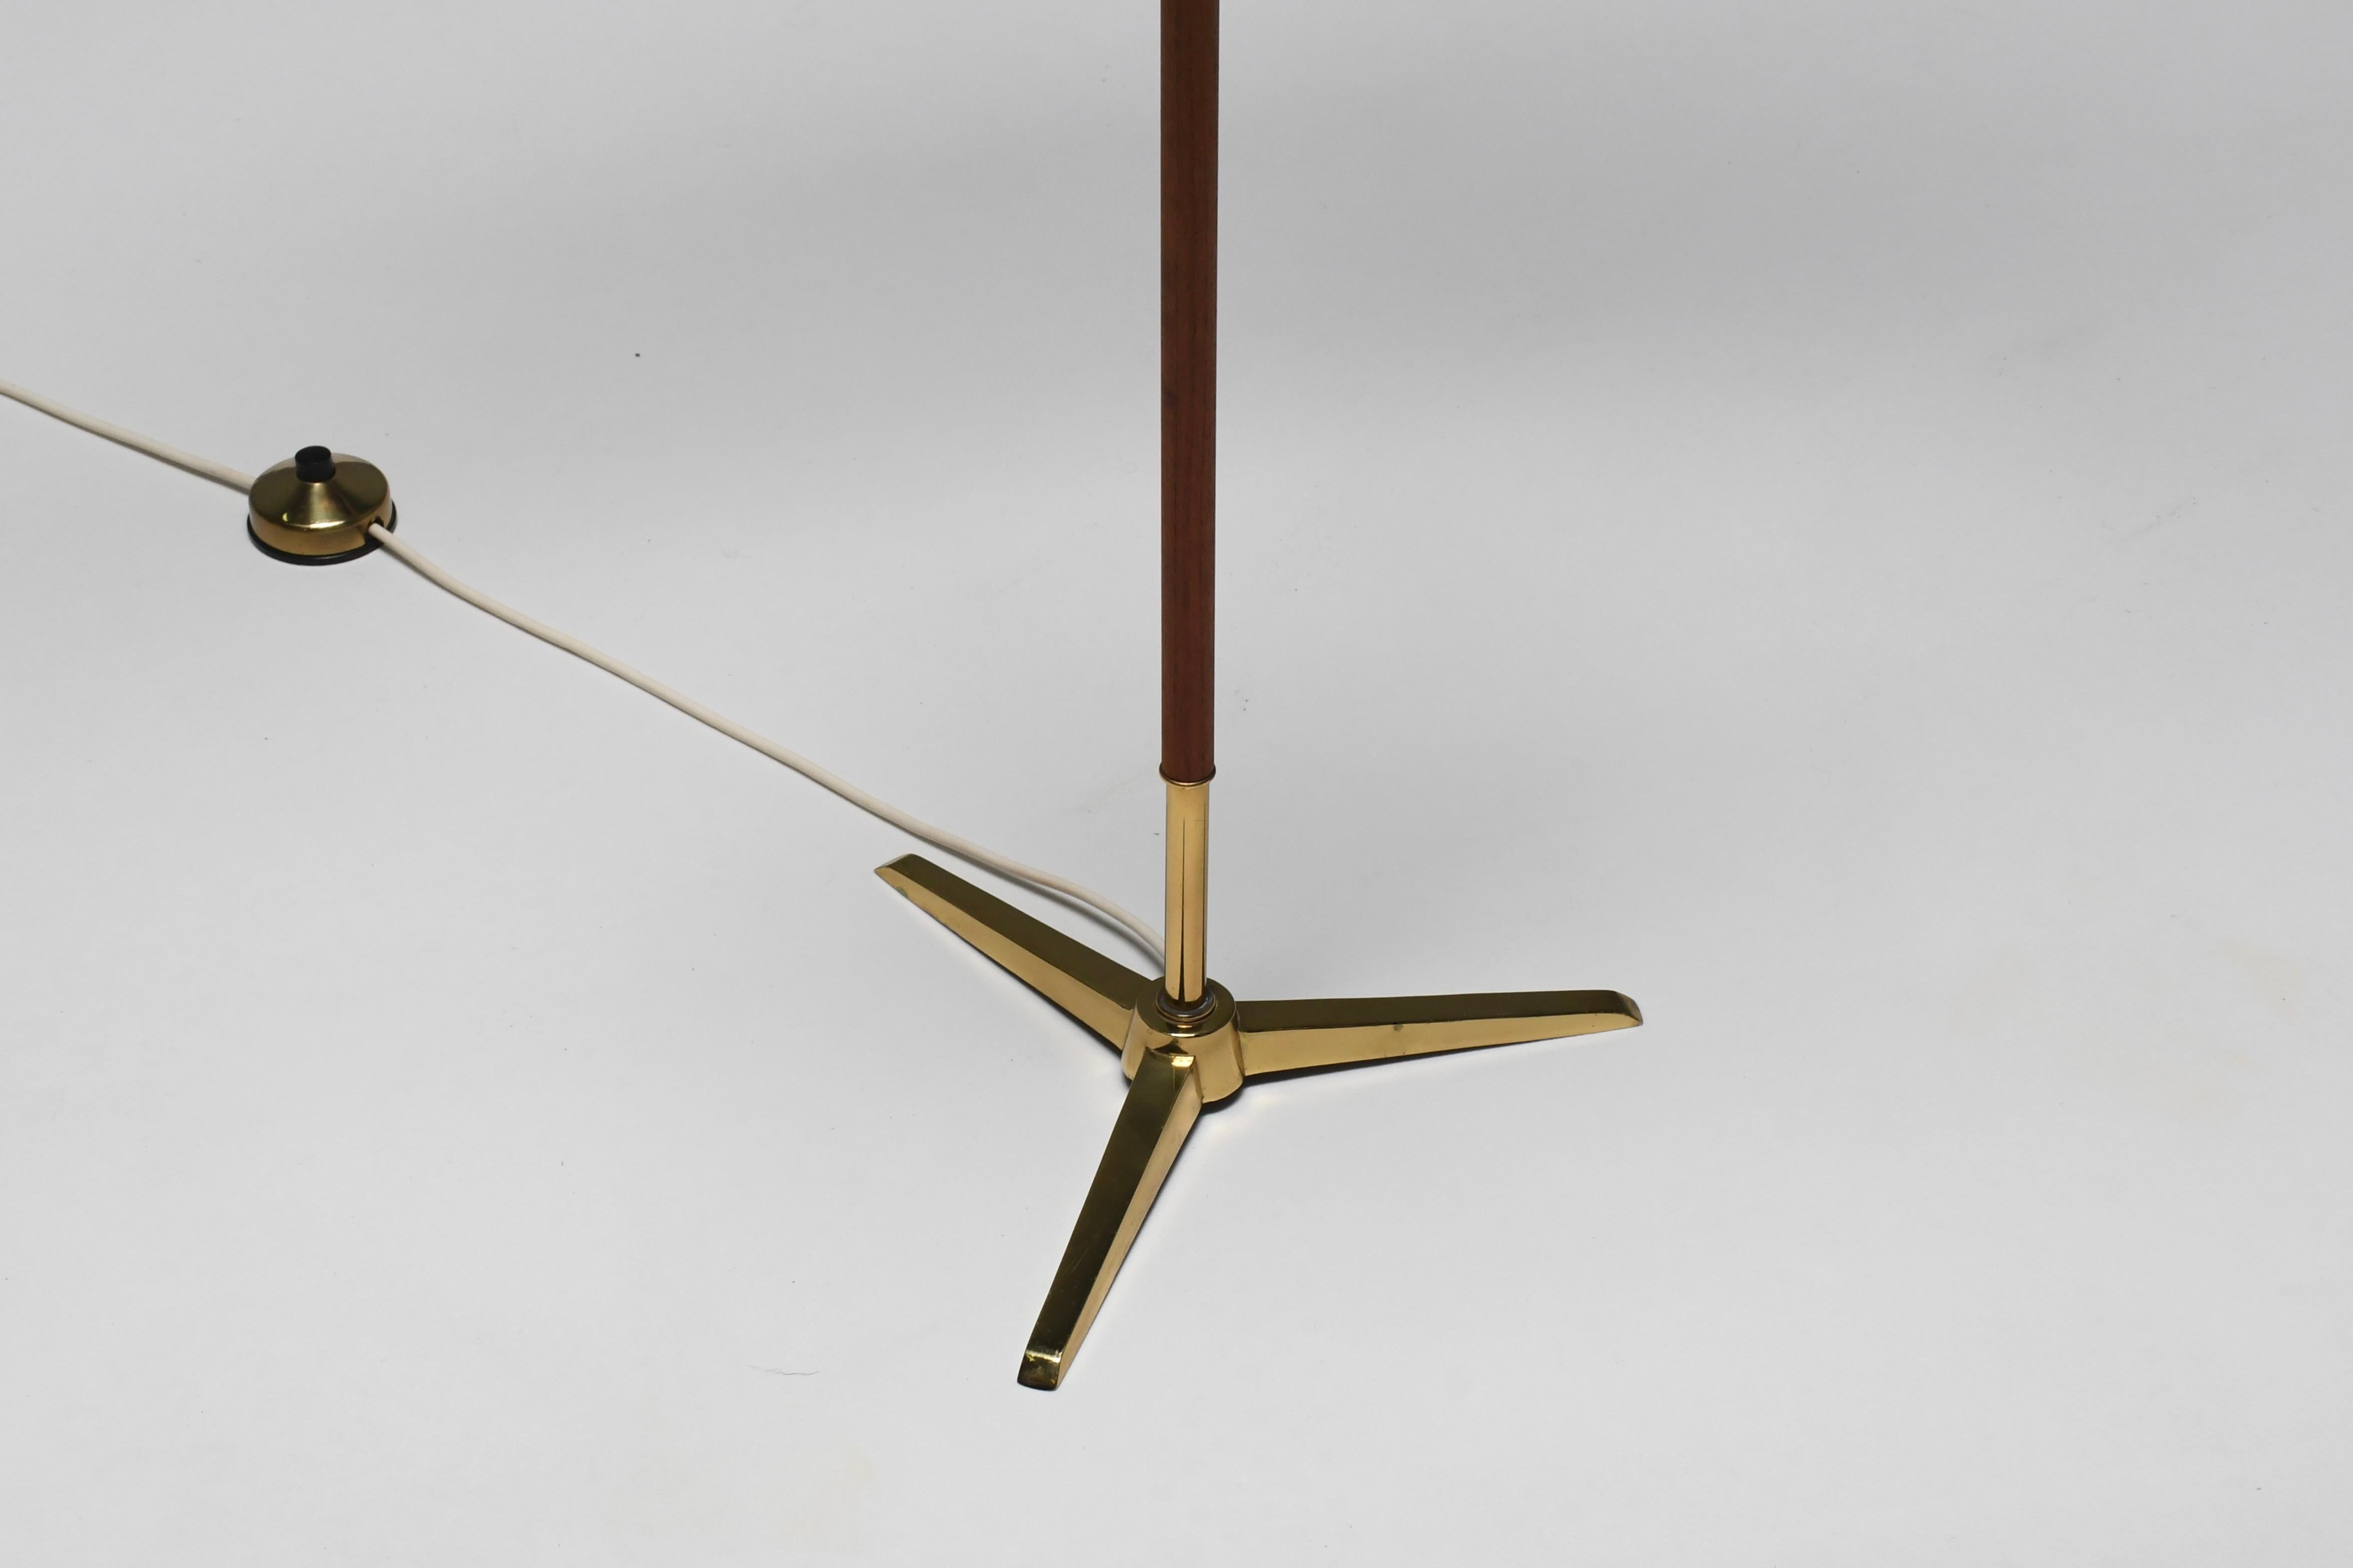 Tripod Floor Lamp by Fog & Mørup made of Teak and Brass, Denmark 1960s In Good Condition For Sale In Echt, NL